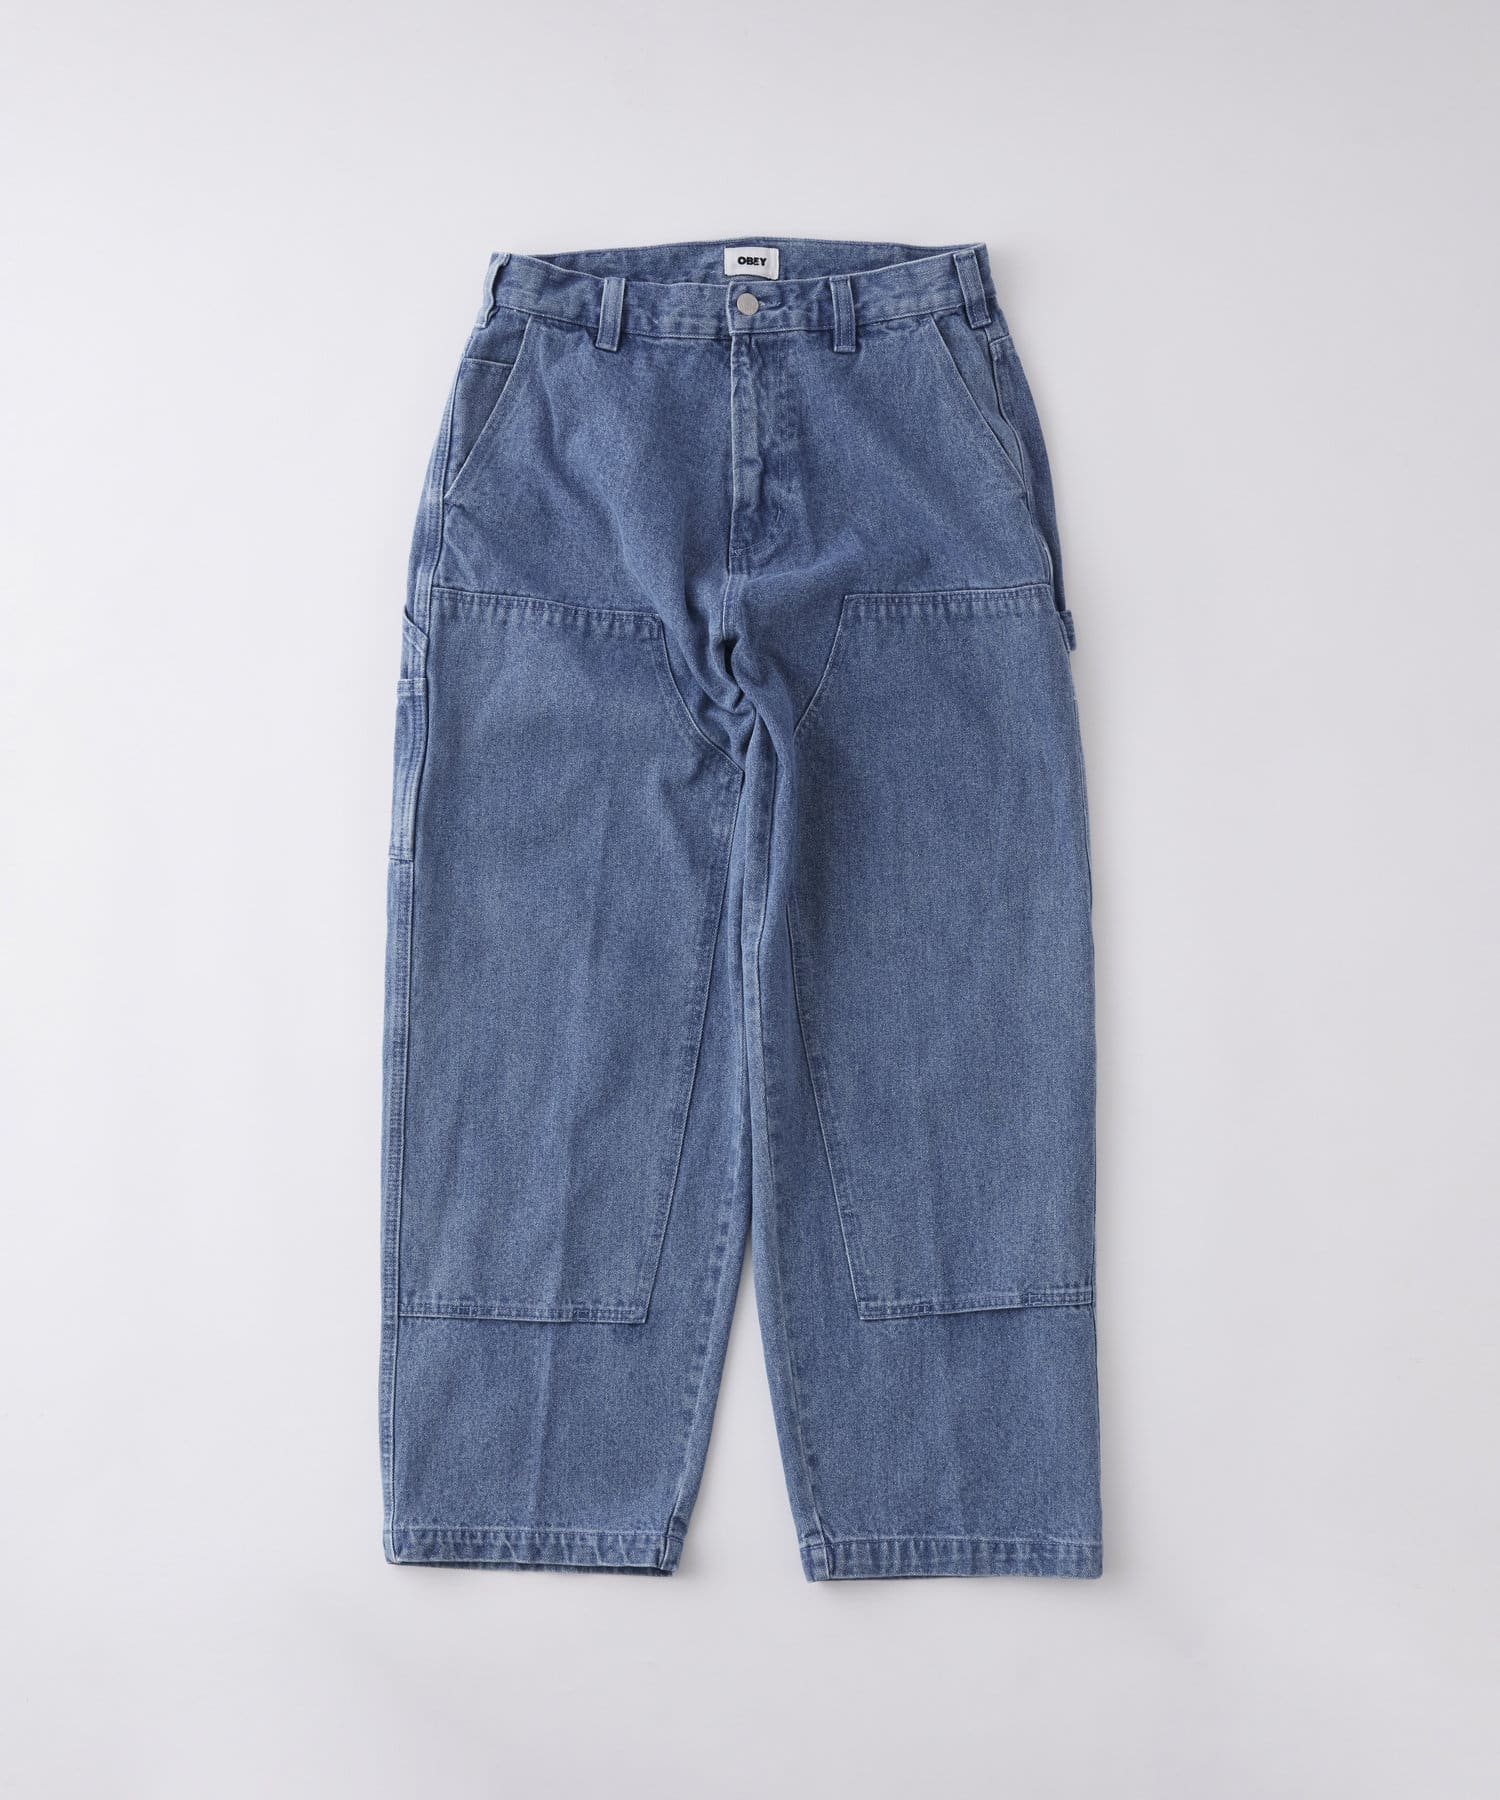 WHO’S WHO gallery(フーズフーギャラリー) OBEY BIGWIG DENIM CARPENTER PANT